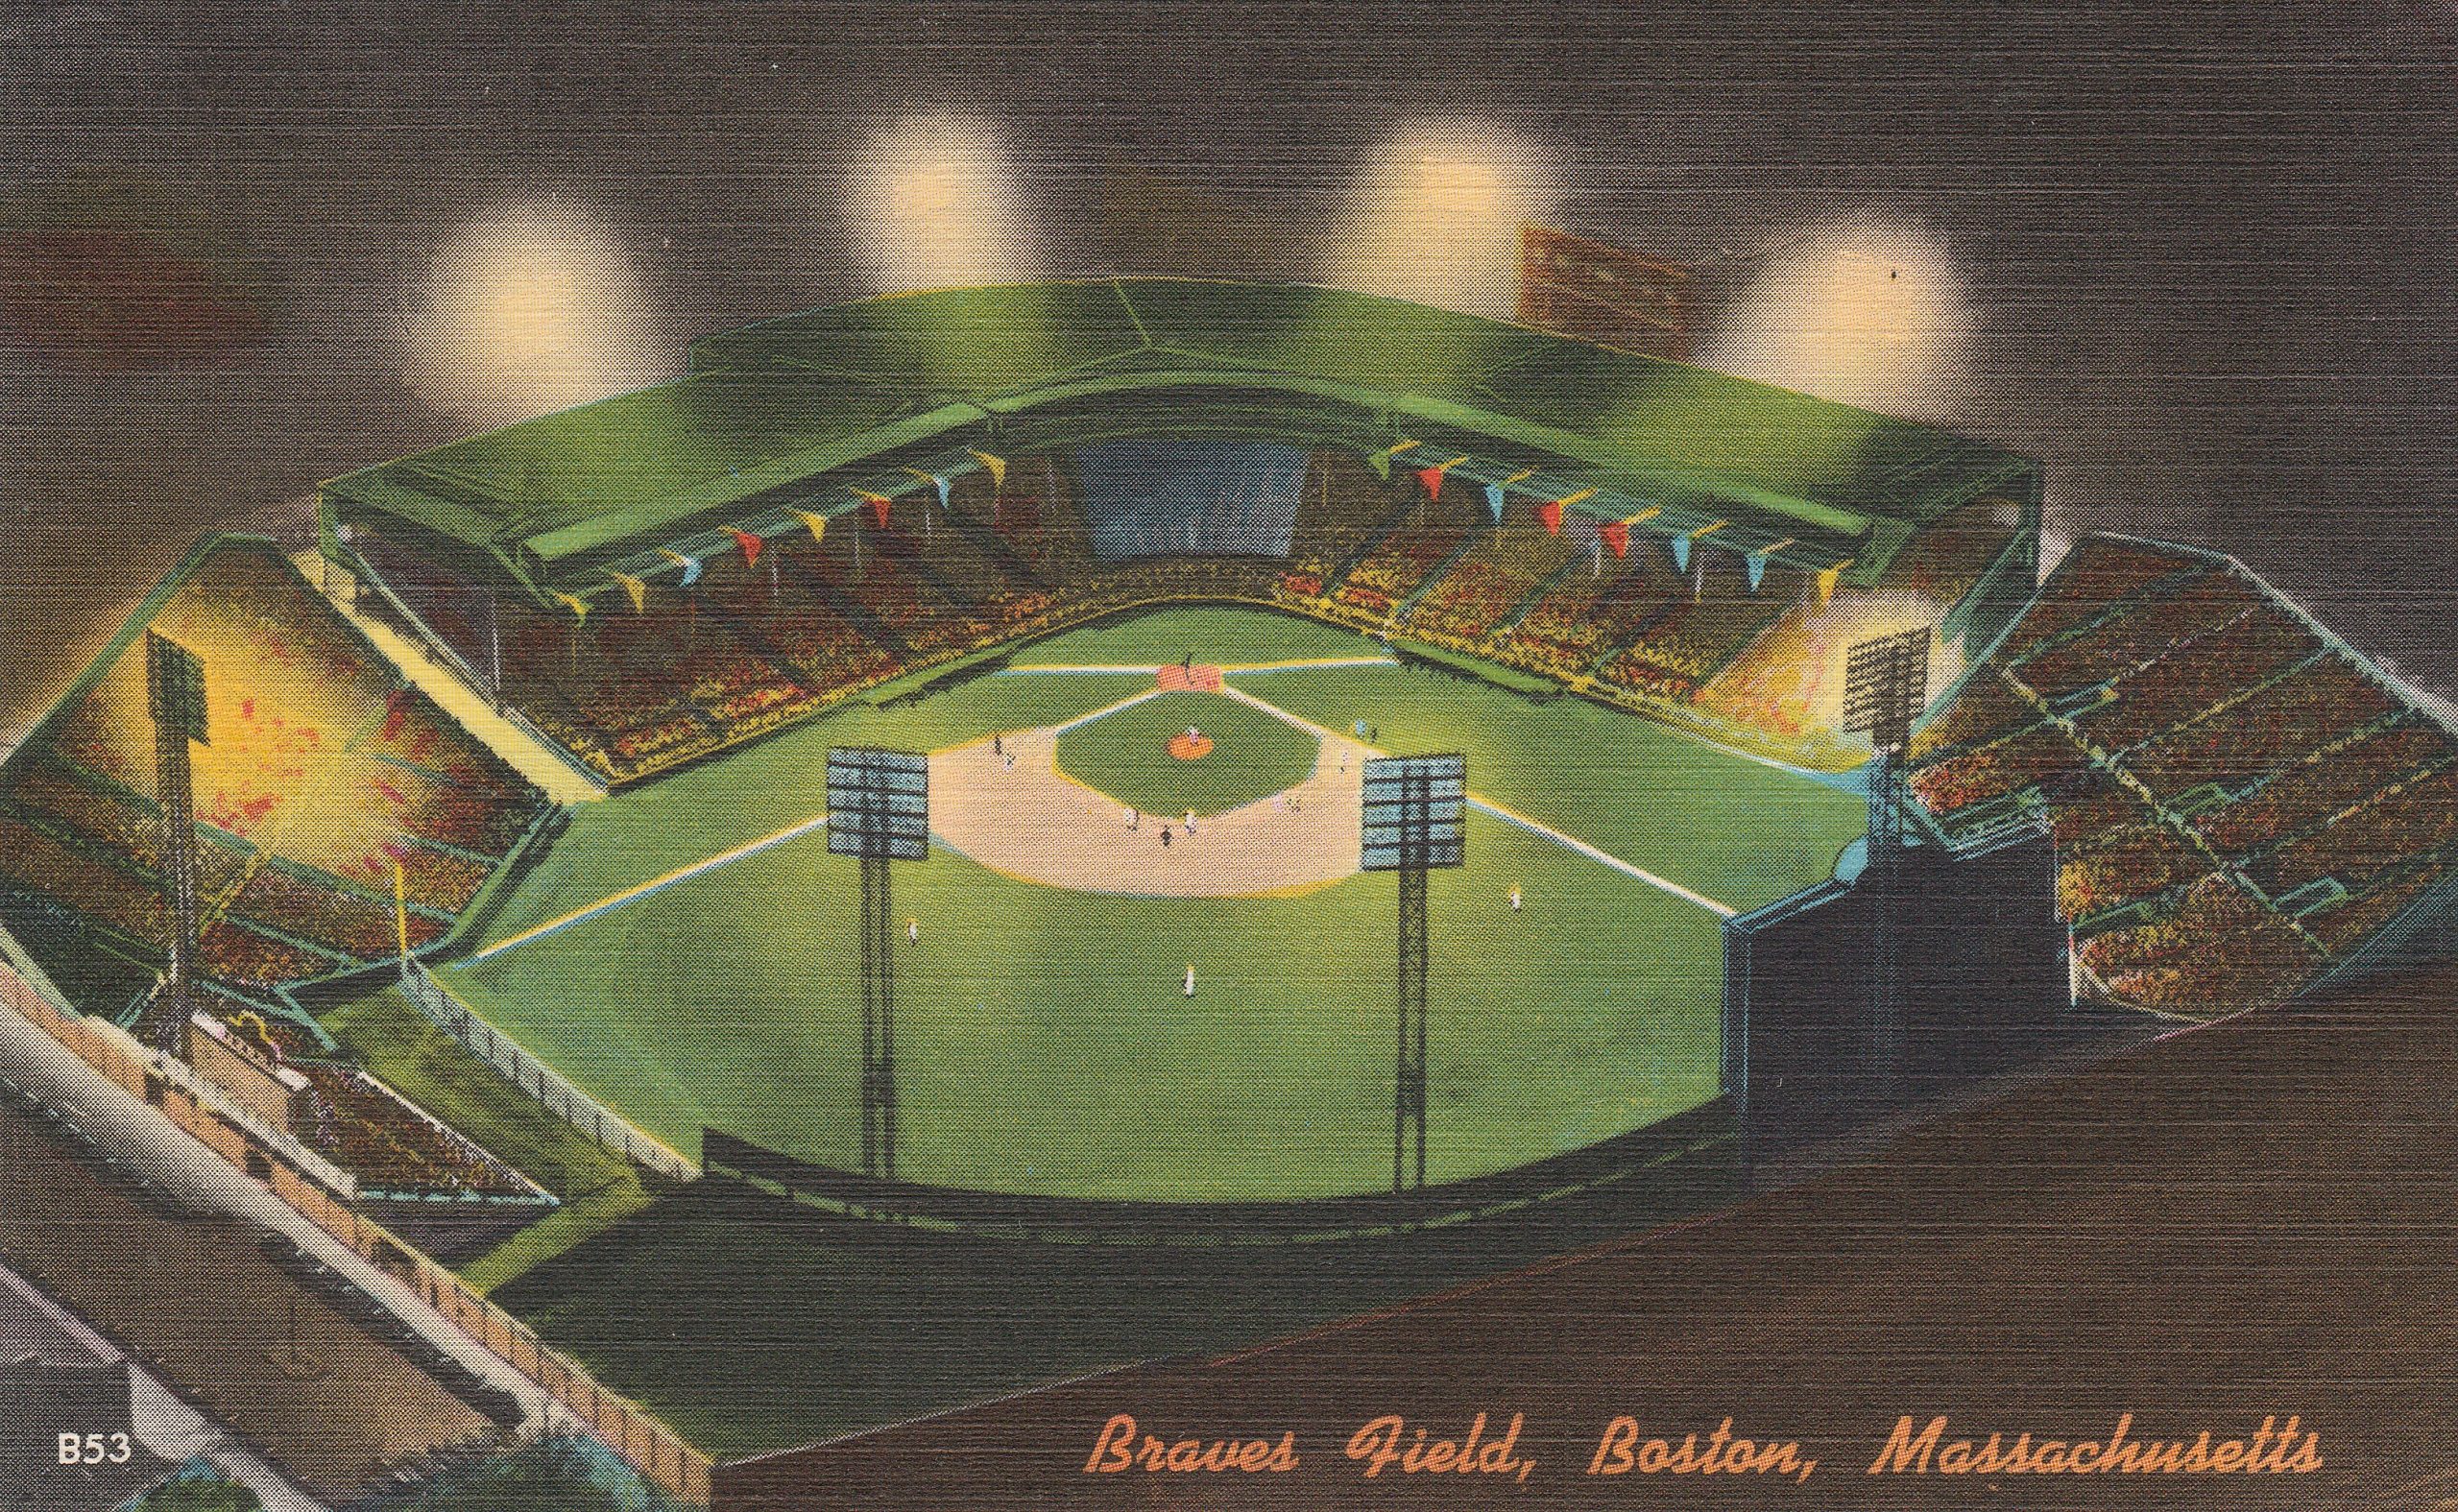 Ballparks Polo Grounds - This Great Game